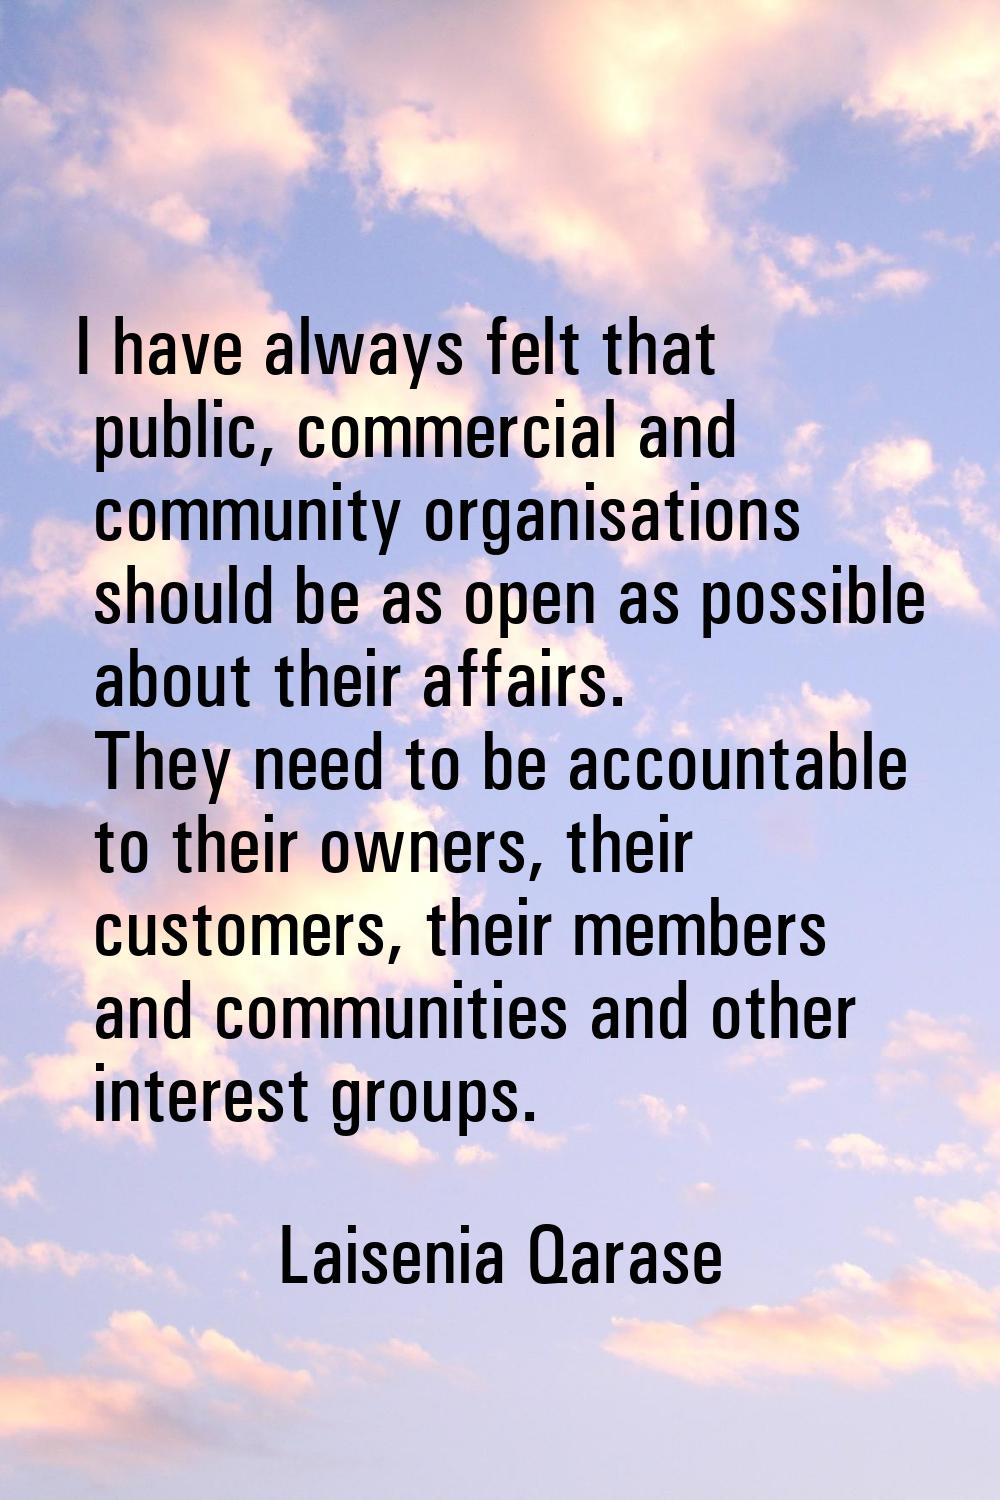 I have always felt that public, commercial and community organisations should be as open as possibl